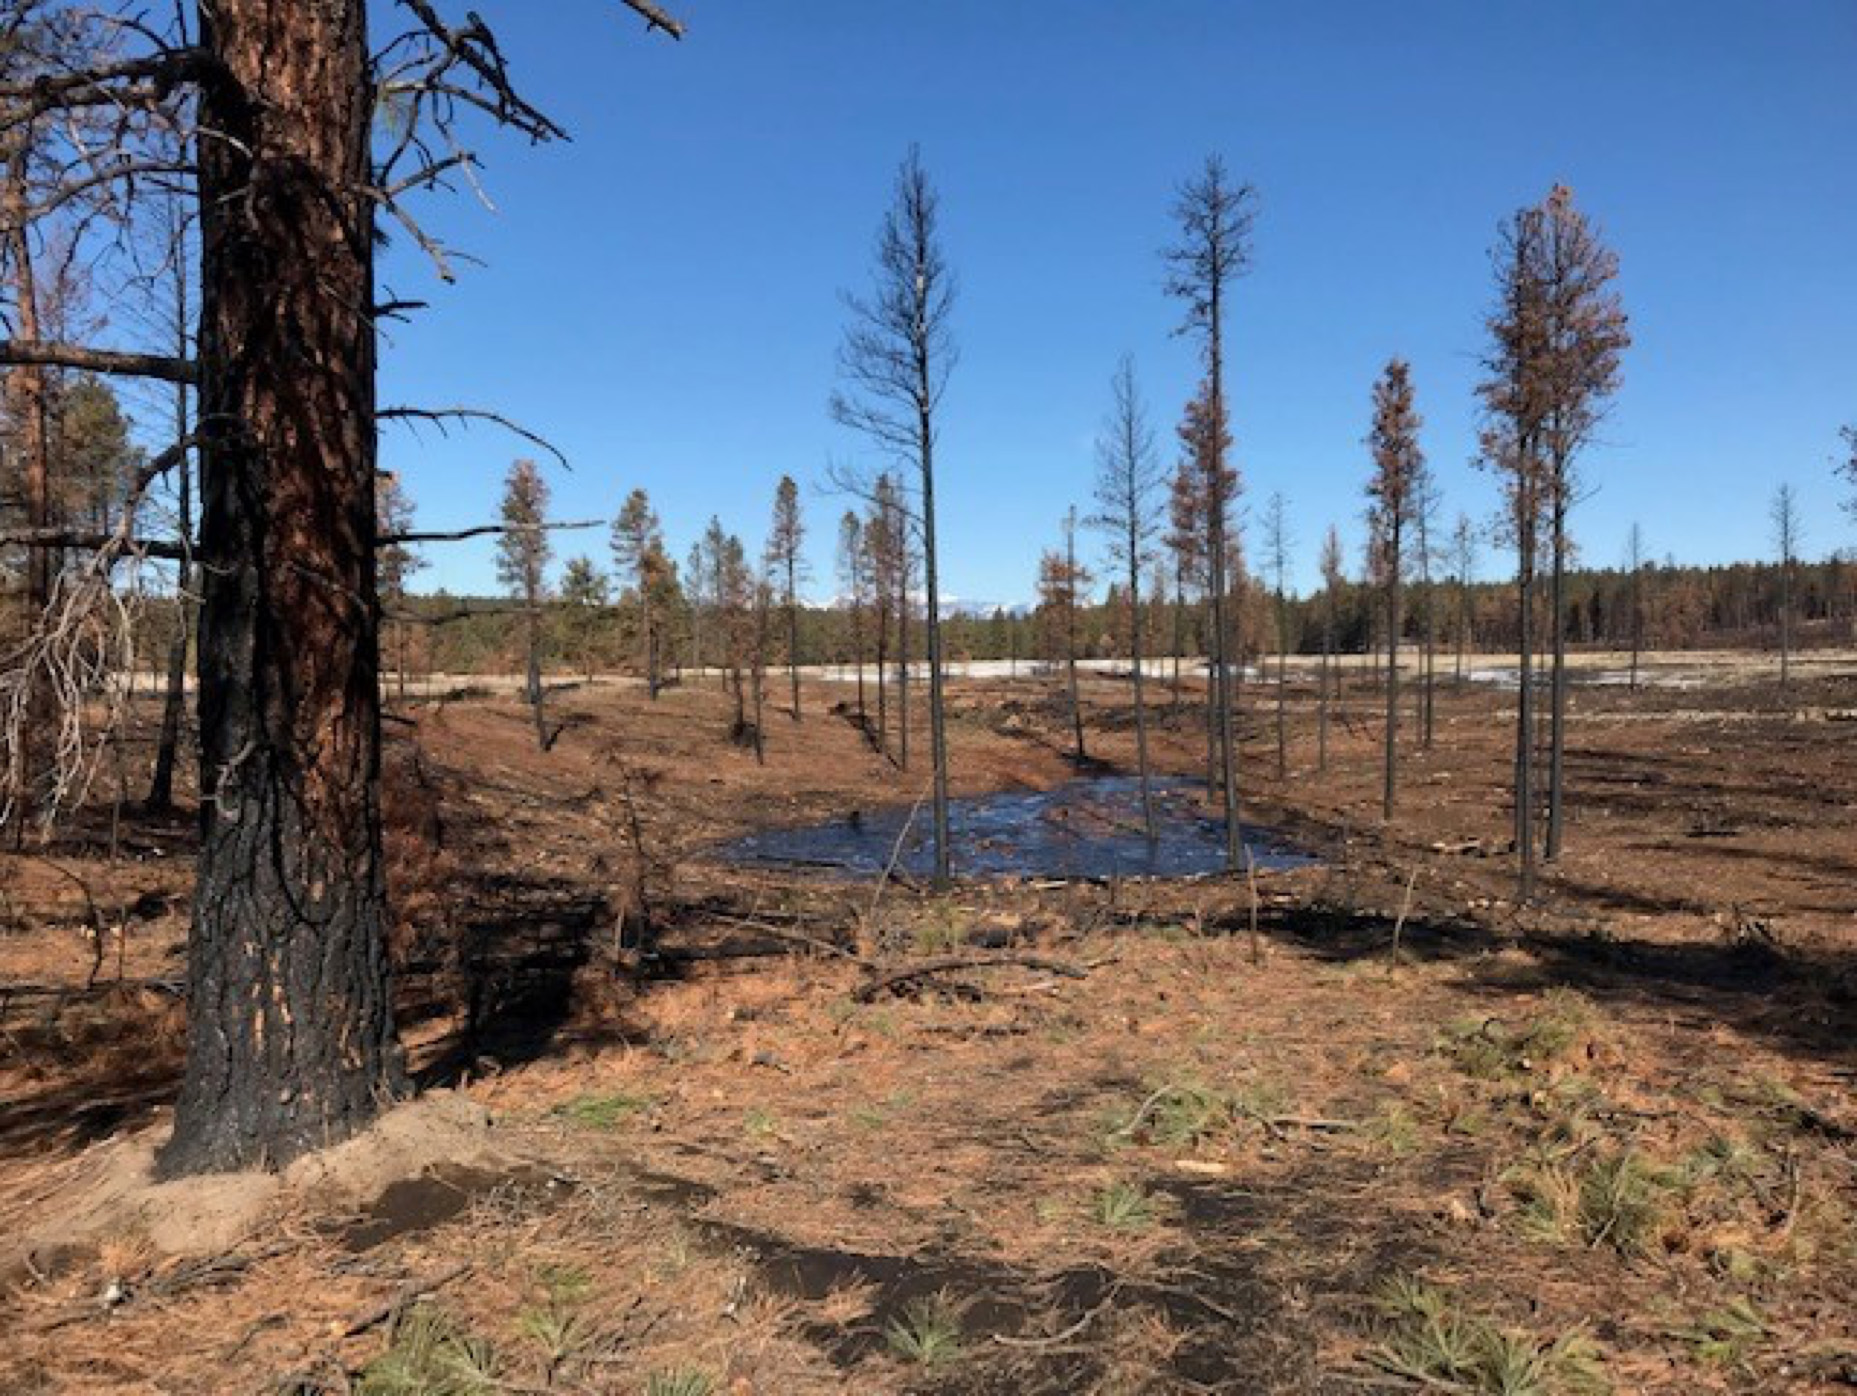 A large, charred tree is in the foreground and there are a few small conifers, some completely burned. The ground is mostly brown and barren, except for a few dots of green.